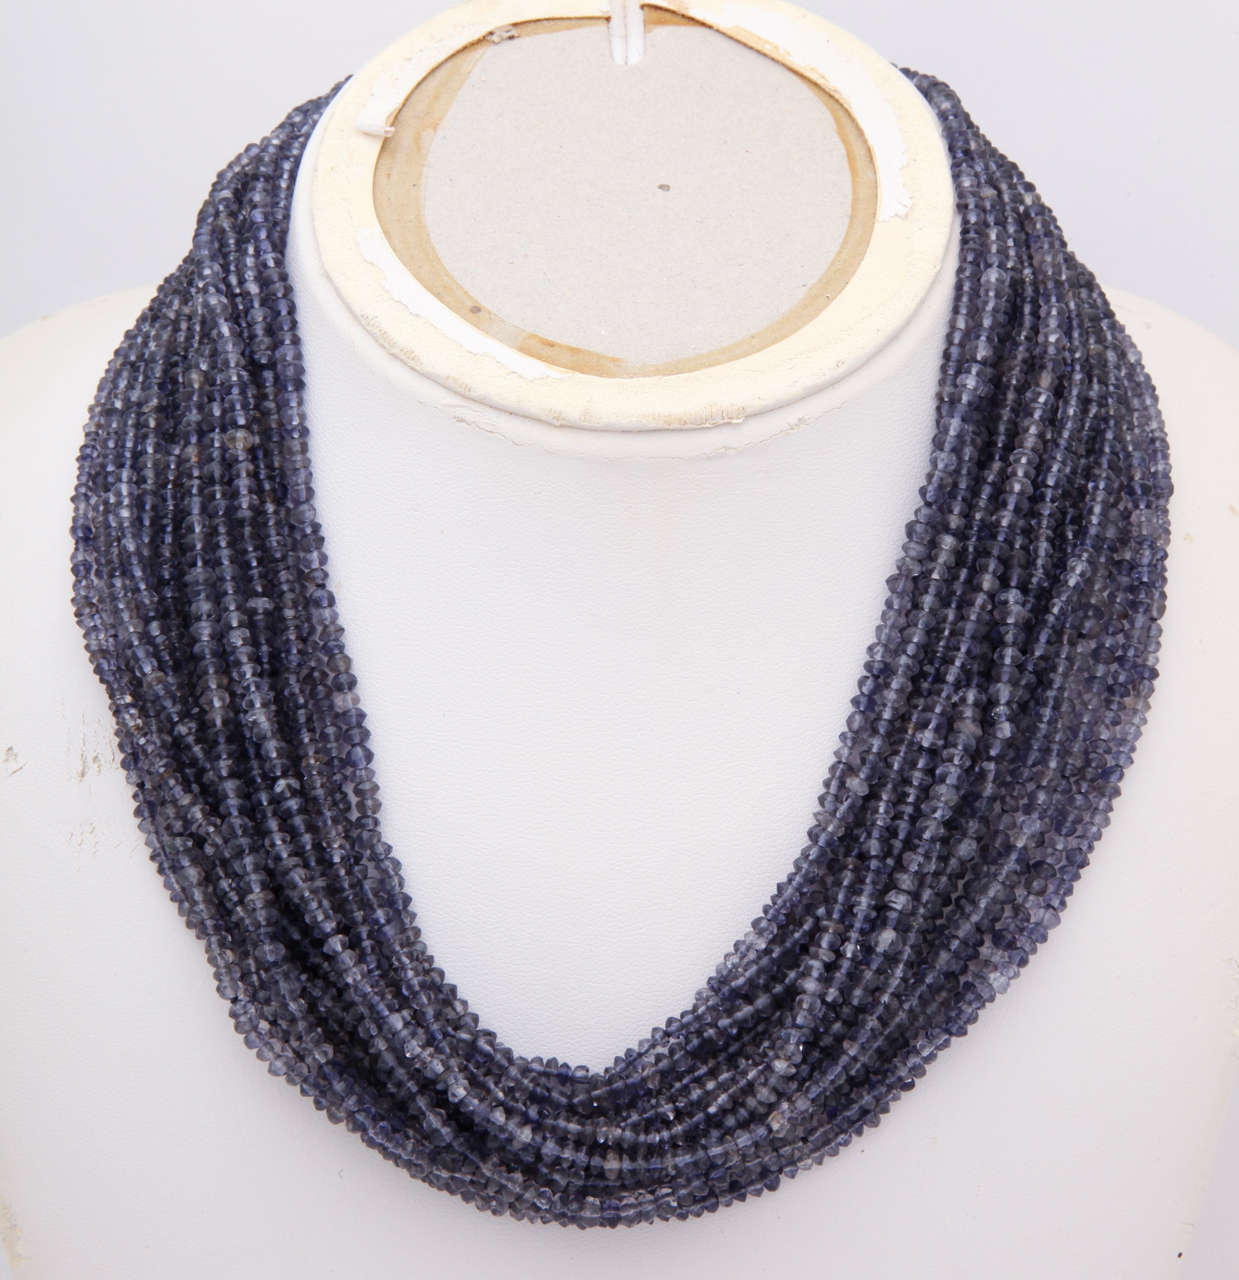 Iolite is a blue stone often mistaken for sapphire. There are 20 strands of faceted 3-5 mm beads. The beads sparkle beautifully.The clasp  is 14kt and 18 kt and closes with a hook and a figure 8 safety. The shortest strand is 16 in. and the longest